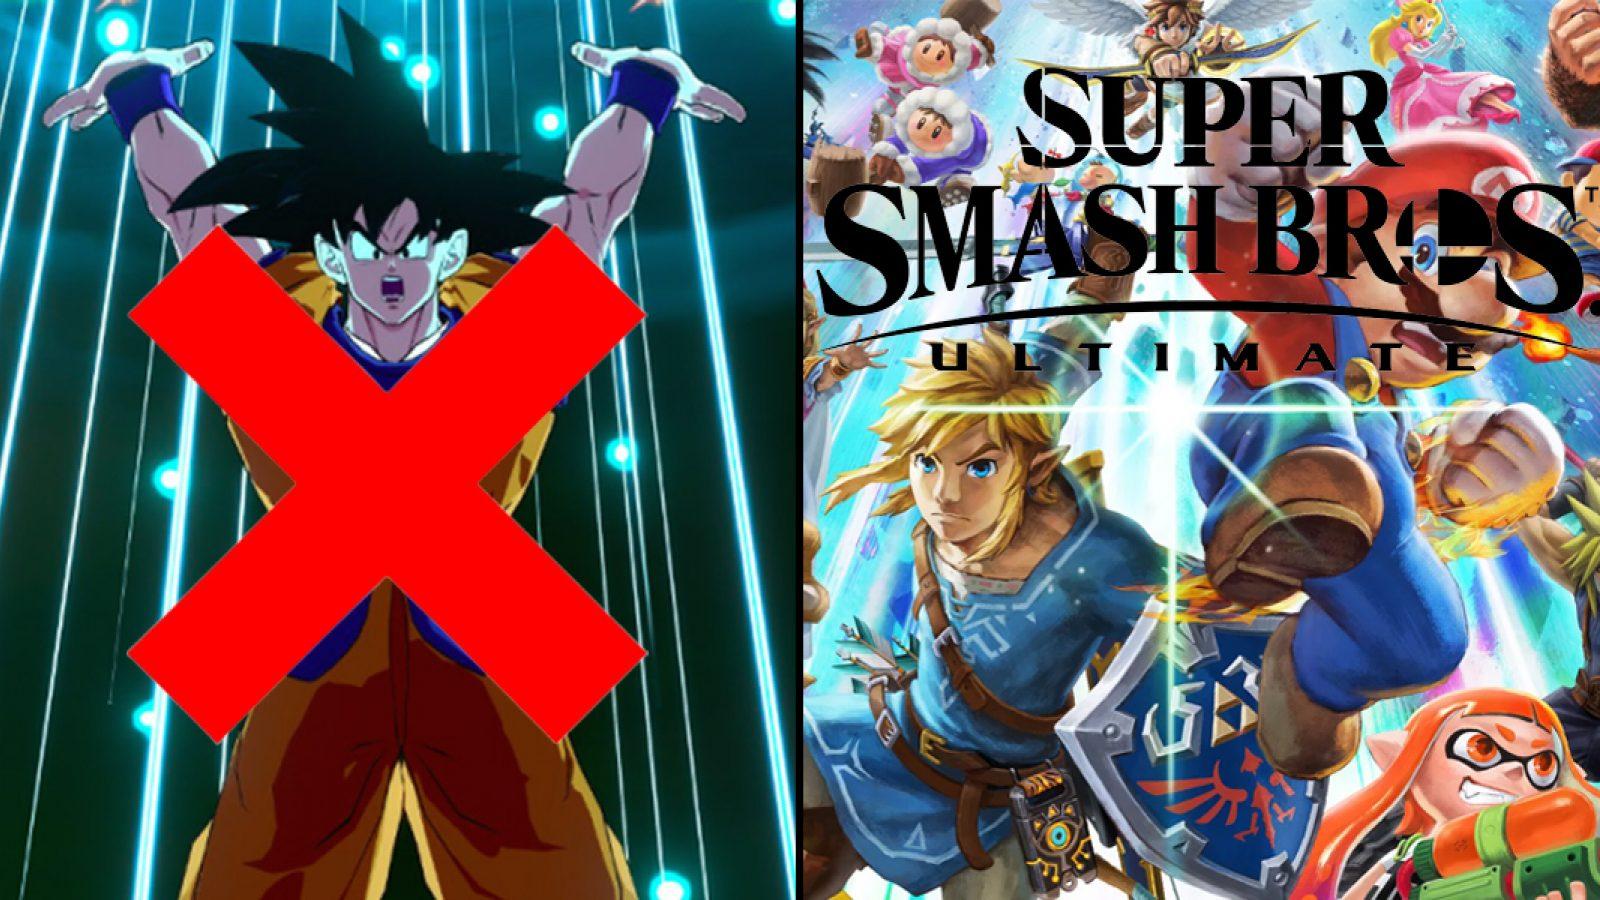 https://www.dexerto.com/cdn-cgi/image/width=3840,quality=75,format=auto/https://editors.dexerto.com/wp-content/uploads/thumbnails/_thumbnailLarge/Smash-Bros-creator-explains-why-Goku-will-never-be-added-to-the-game.jpg